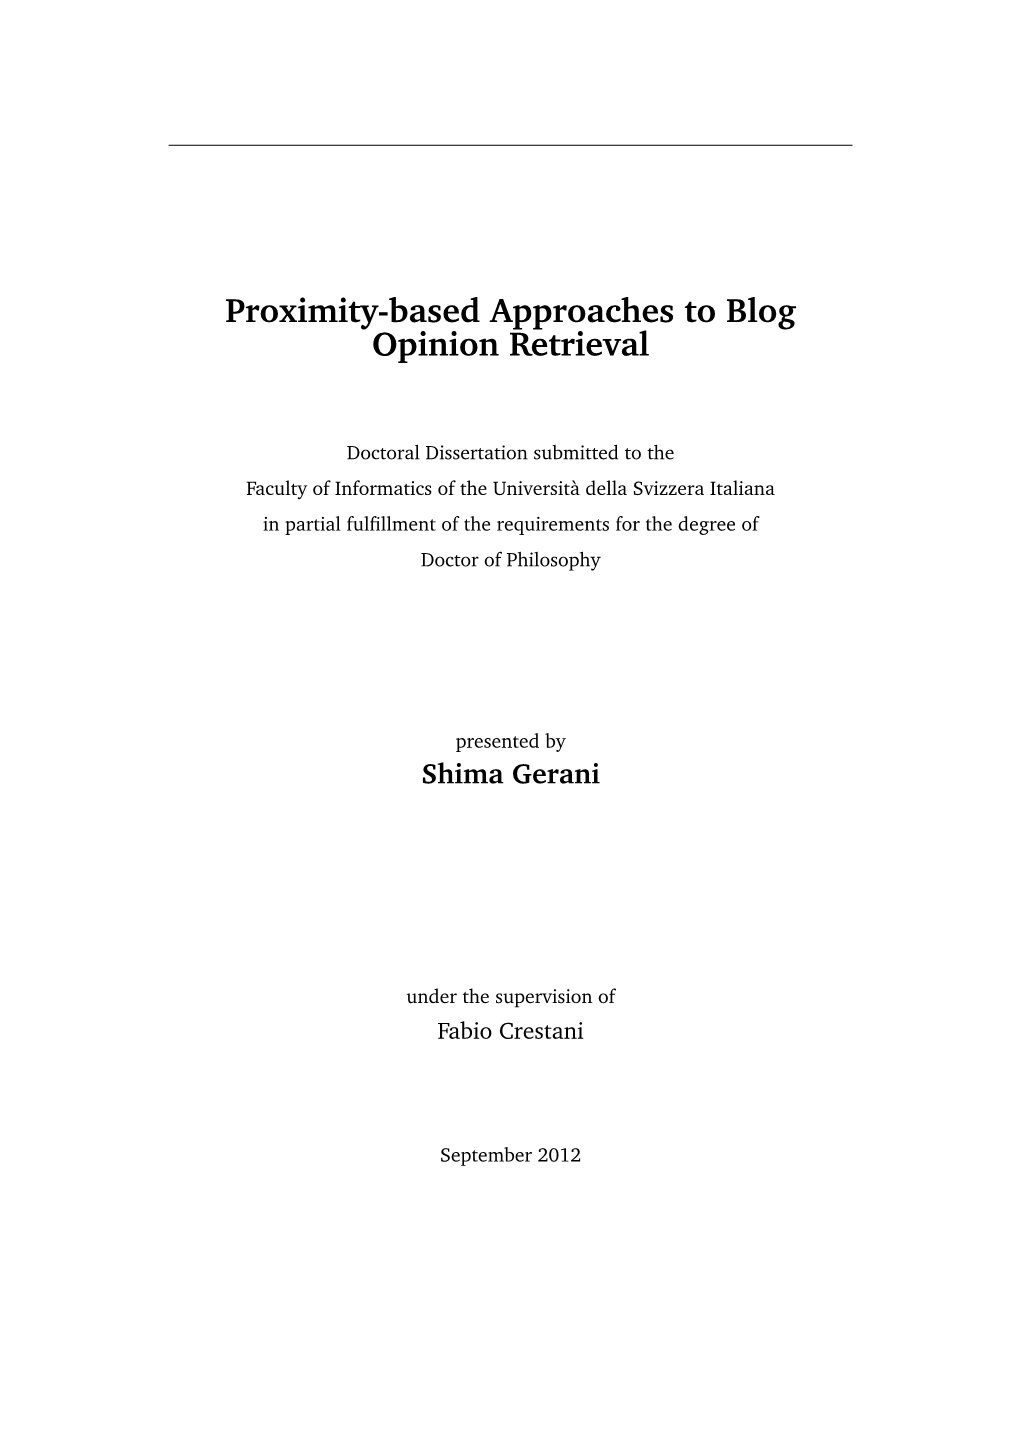 Proximity-Based Approaches to Blog Opinion Retrieval